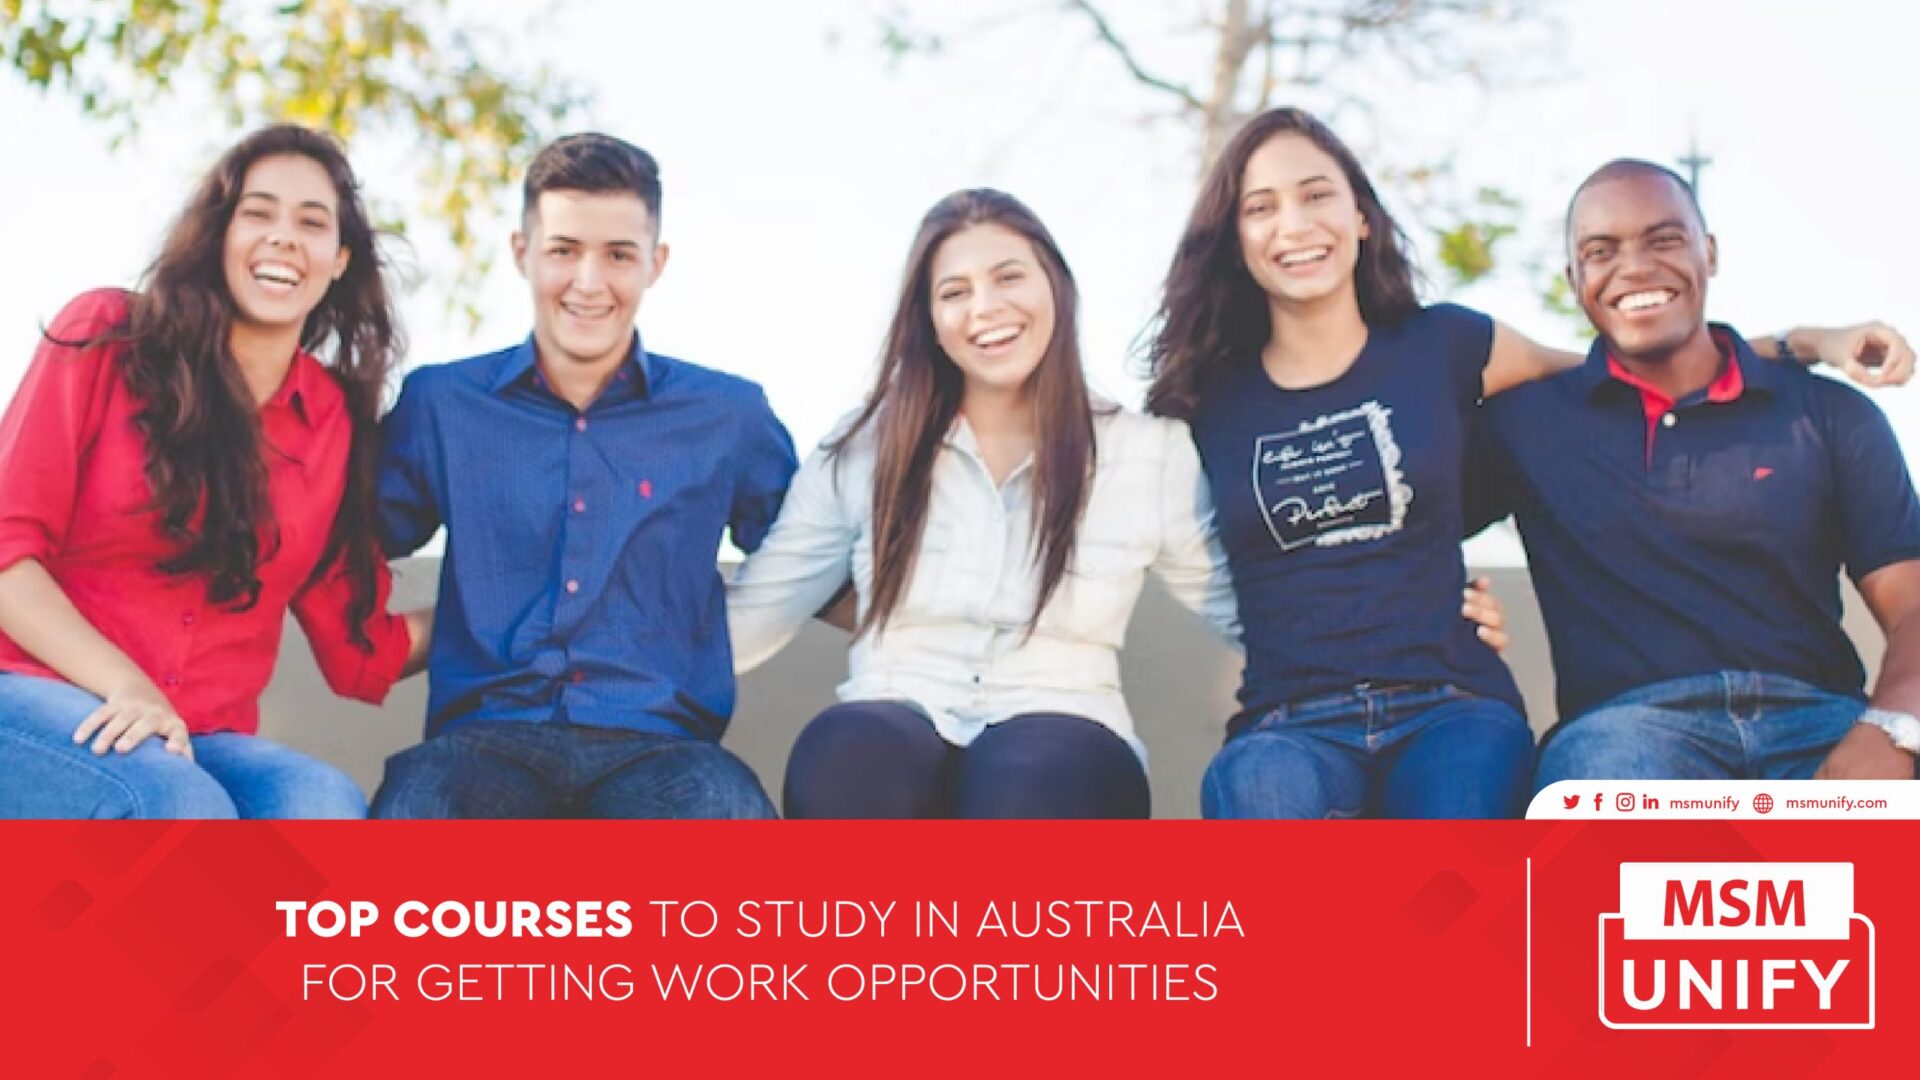 012623 MSM Unify Top Courses to Study in Australia for Getting Work Opportunities 01 scaled 1